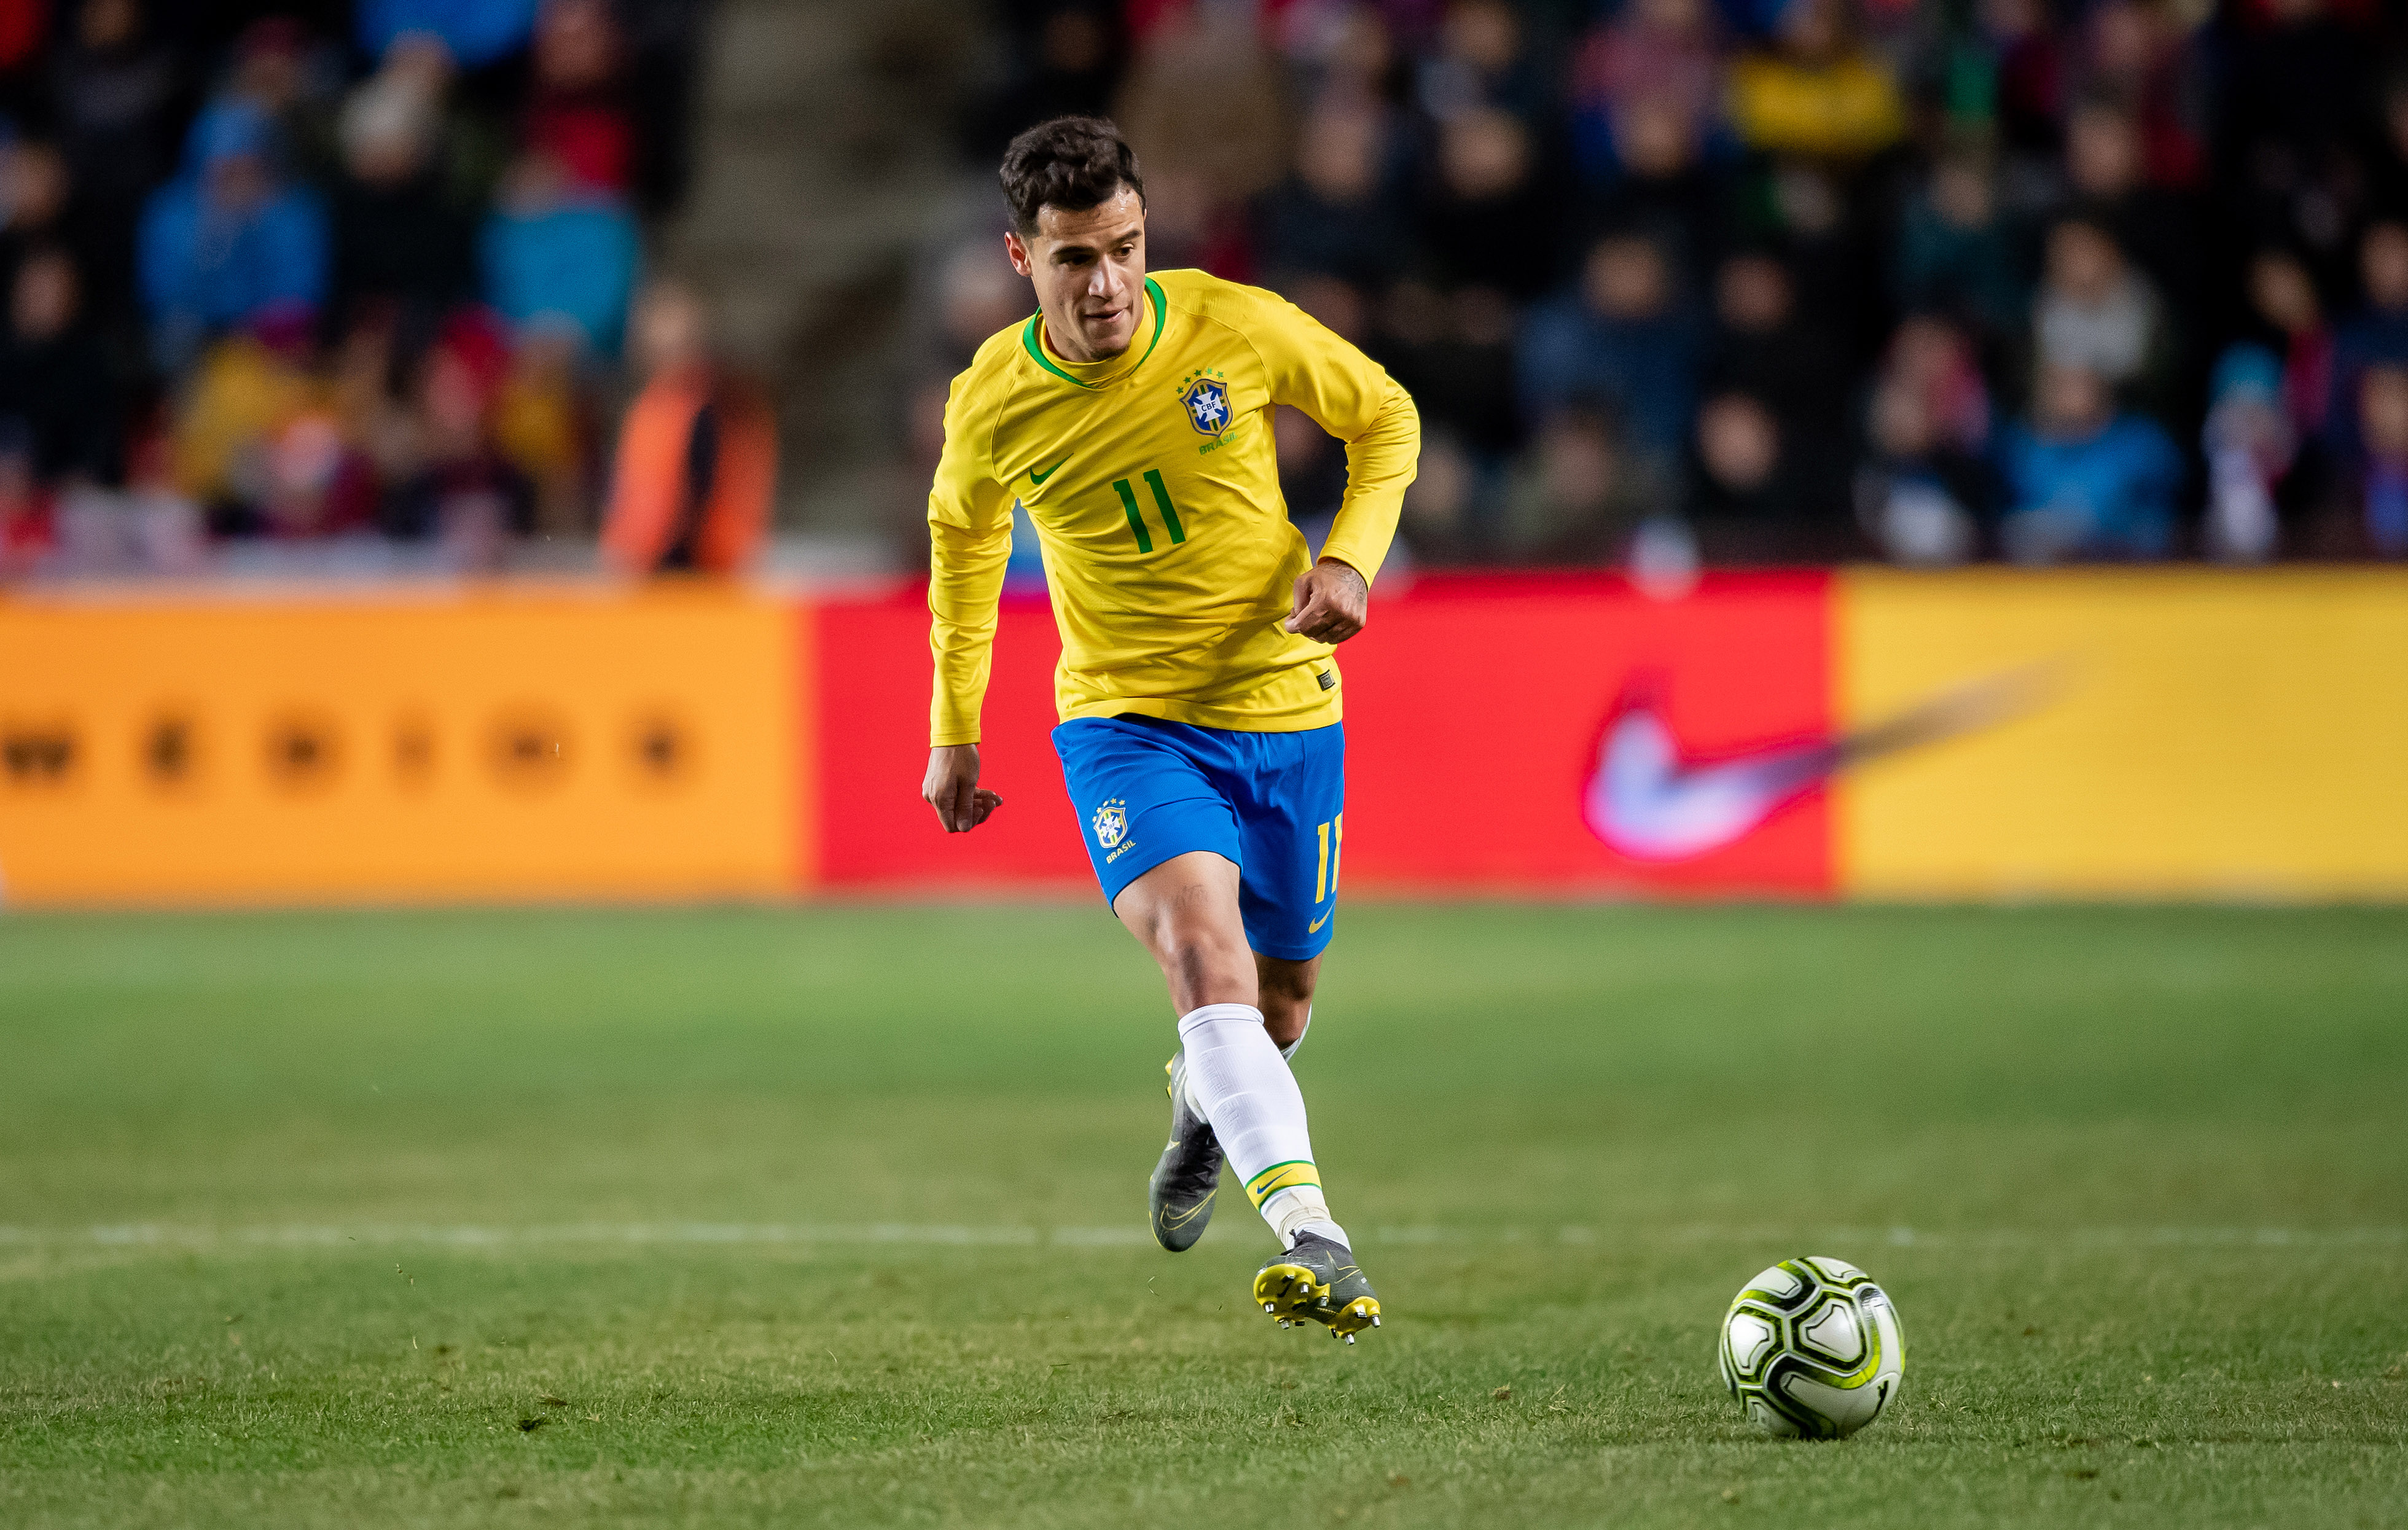 PRAGUE, CZECH REPUBLIC - MARCH 26: Philippe Coutinho of Brazil in action during the international friendly match between the Czech Republic and Brazil at Sinobo Stadium on March 26, 2019 in Prague, Czech Republic. (Photo by Thomas Eisenhuth/Bongarts/Getty Images)